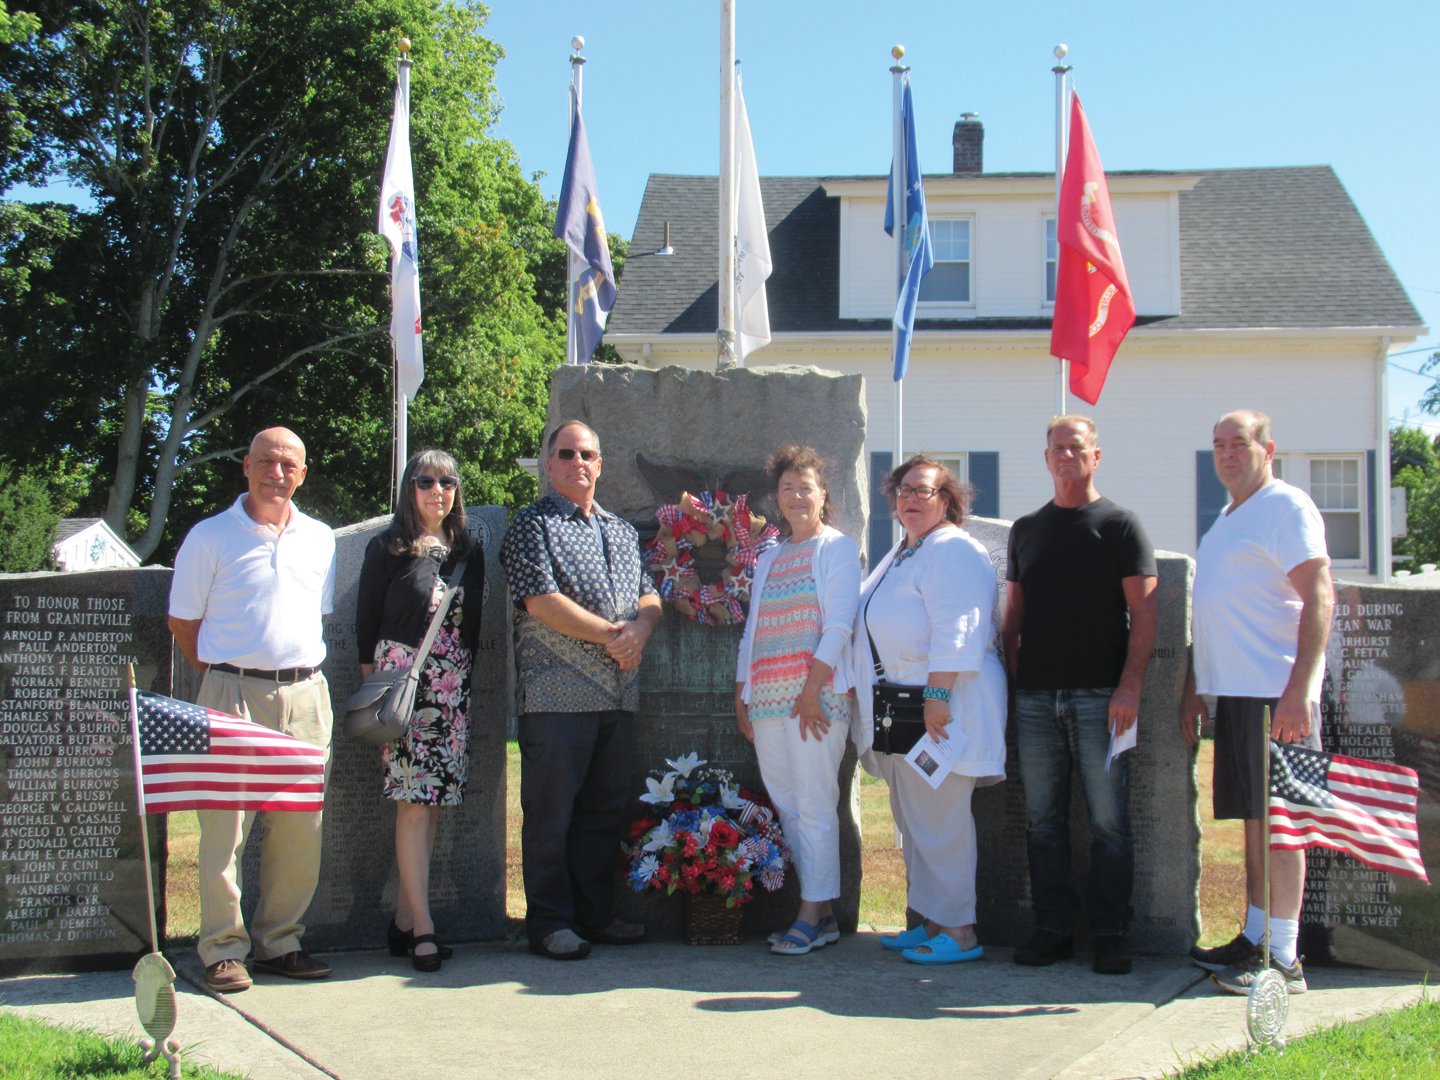 CLASSIC COMMITTEE: Among the Graniteville Veterans Foundation officials who recently held their 22nd annual VJ Day celebration are: Anthony Carlino, Laura Charnley-Panicuci, Rev. David Butera, Marie Carlino, Karen Casale, Jerry Casale and Bob Blanchette.